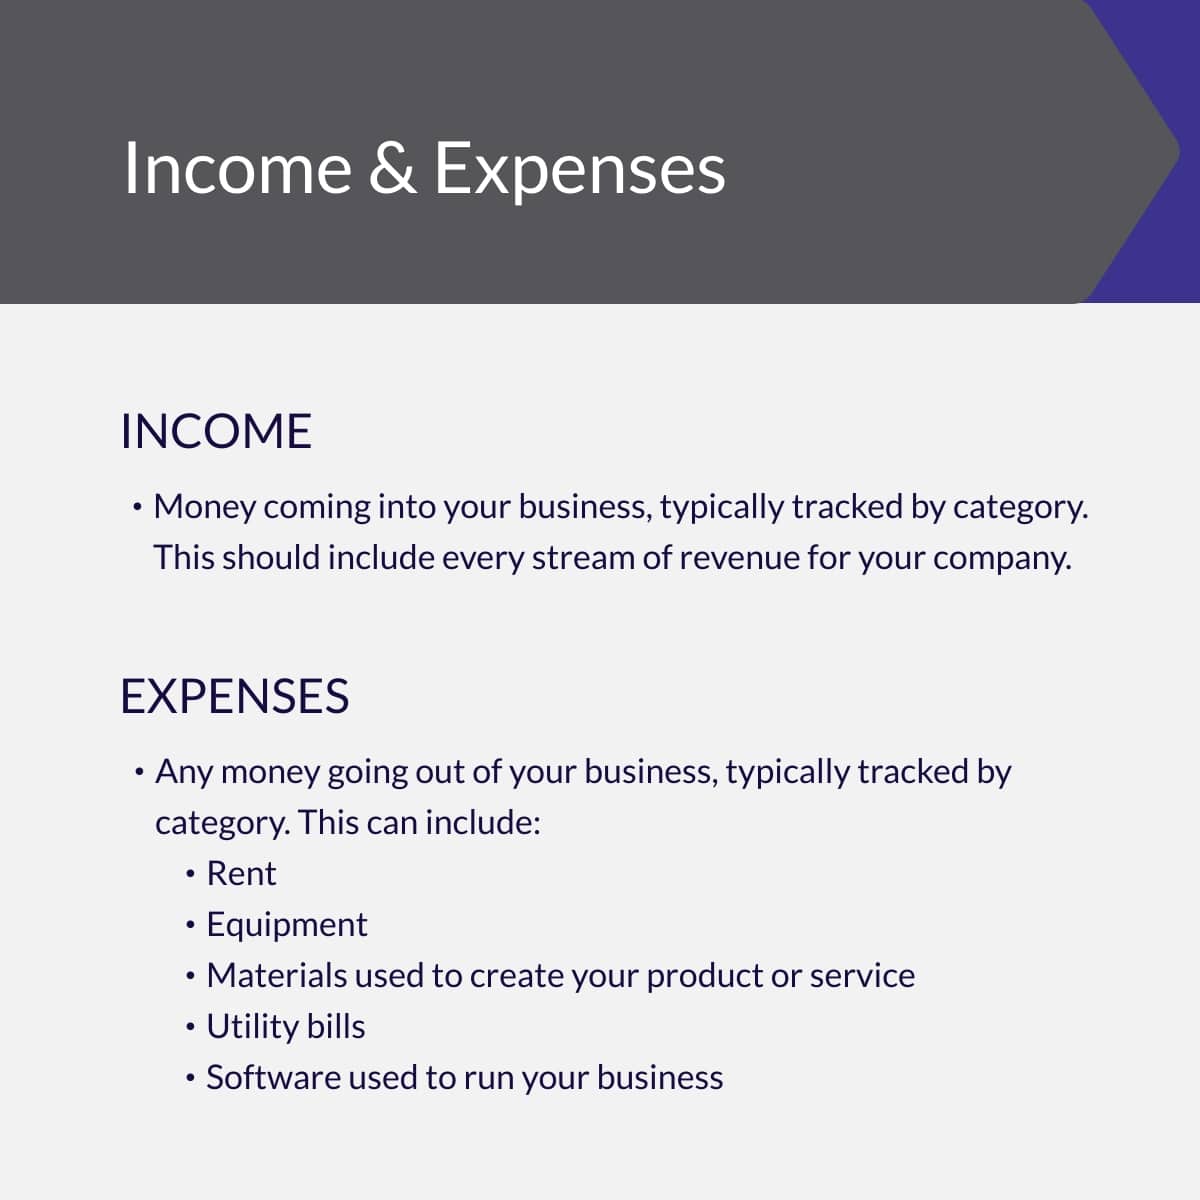 Income and Expenses for Businesses